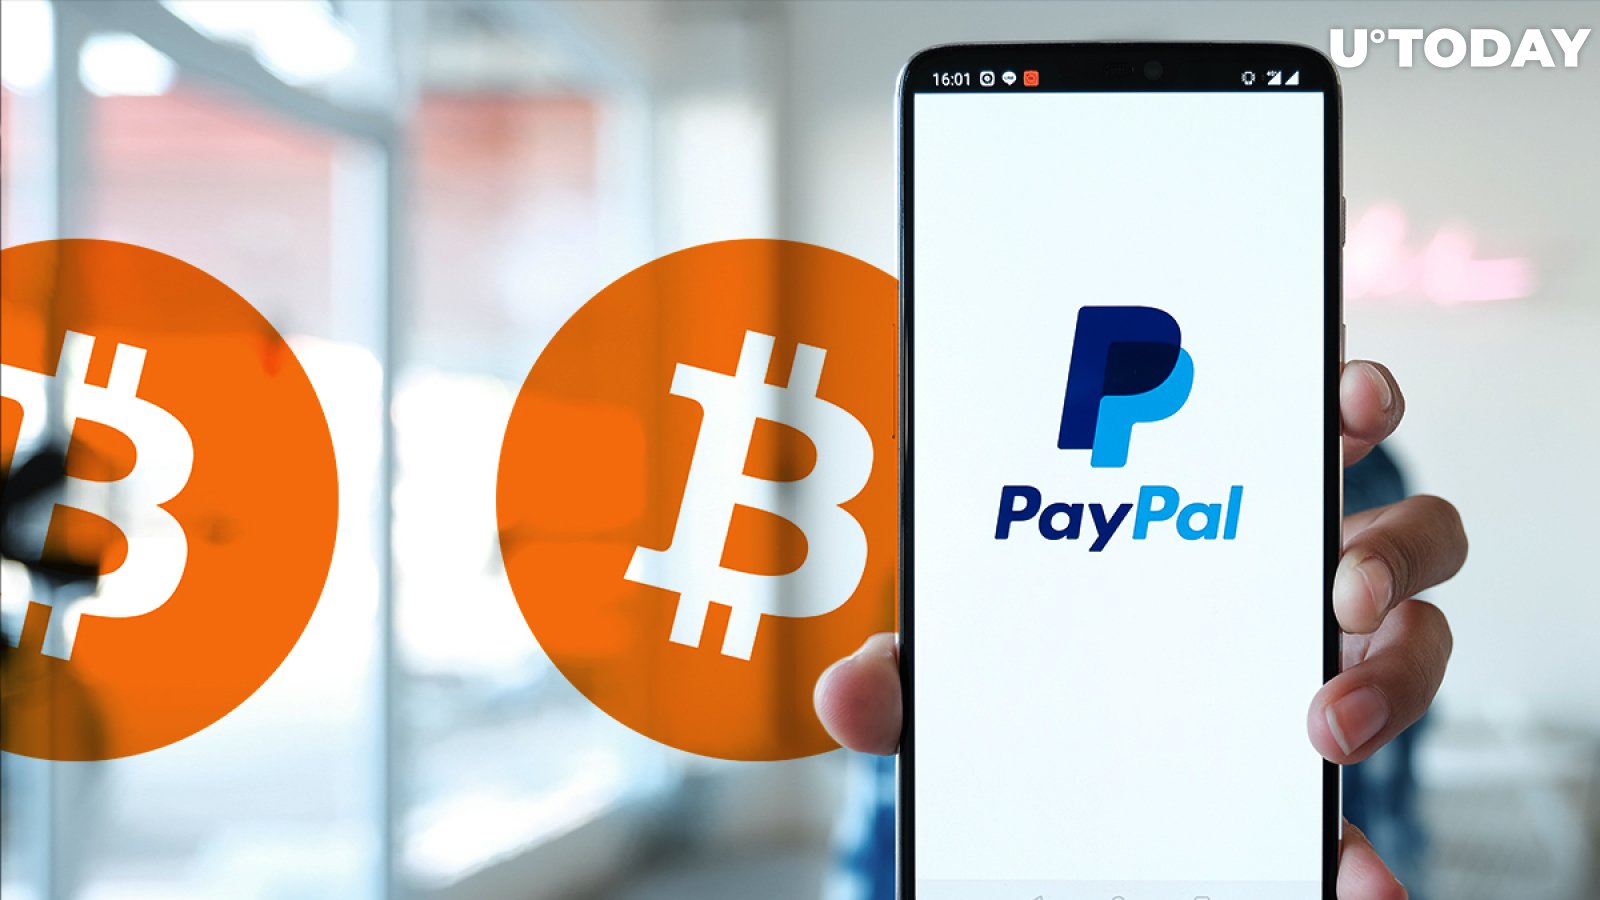 Bitcoin Reaches New Yearly High of $12,490 on PayPal News